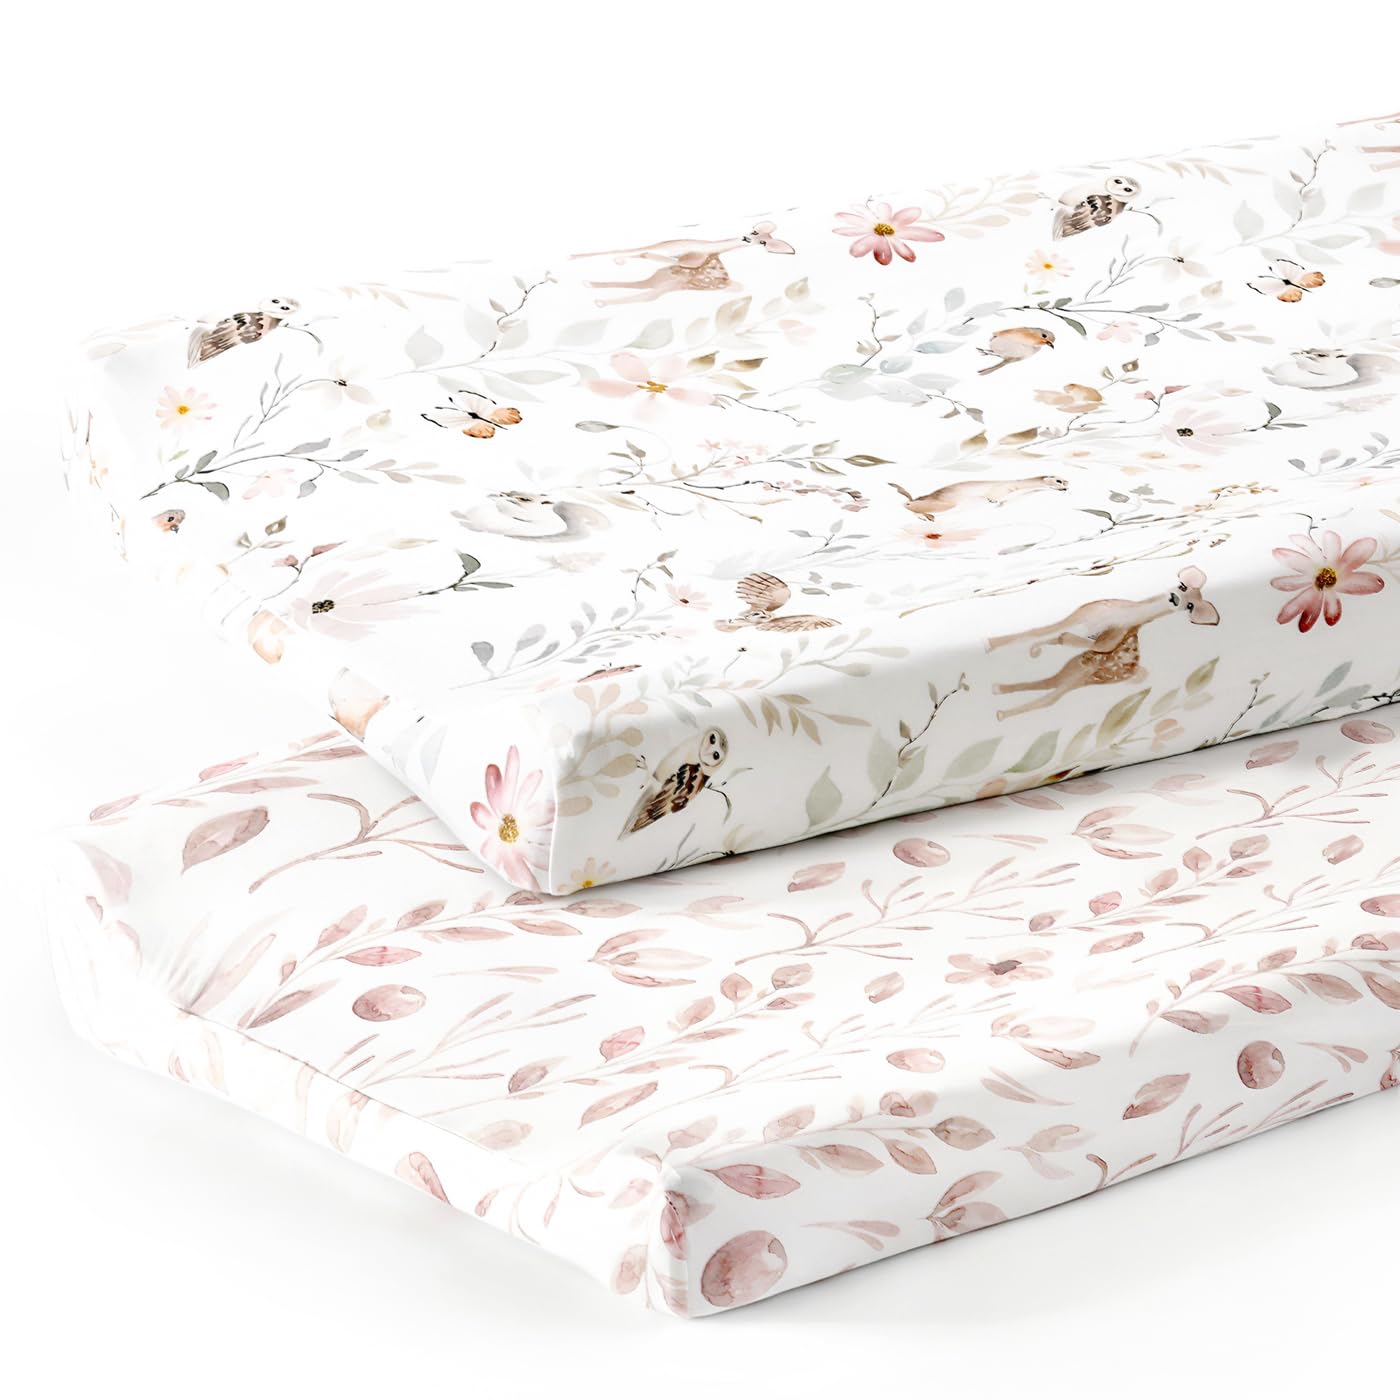 GRSSDER Stretch Ultra Soft Jersey Knit Changing Pad Cover Set 2 Pack, Change Table Pad Covers Fit 32"/34" x 16" Pads Safe and Snug, Stylish Watercolor Flowers and Fruits for Girls